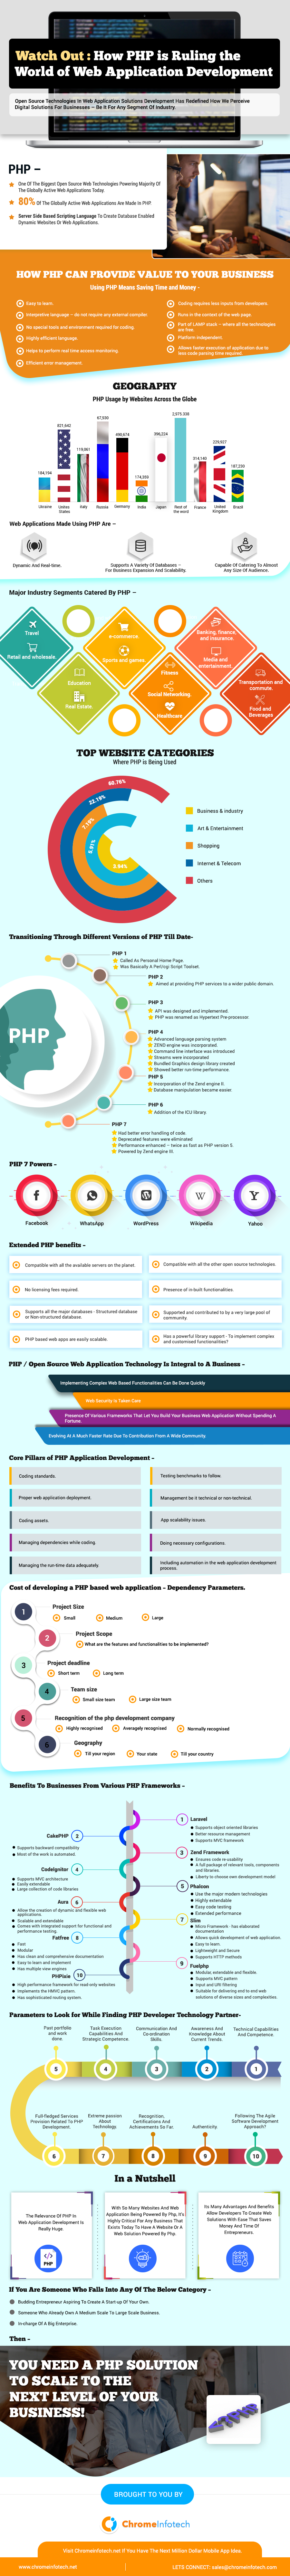 php infographic